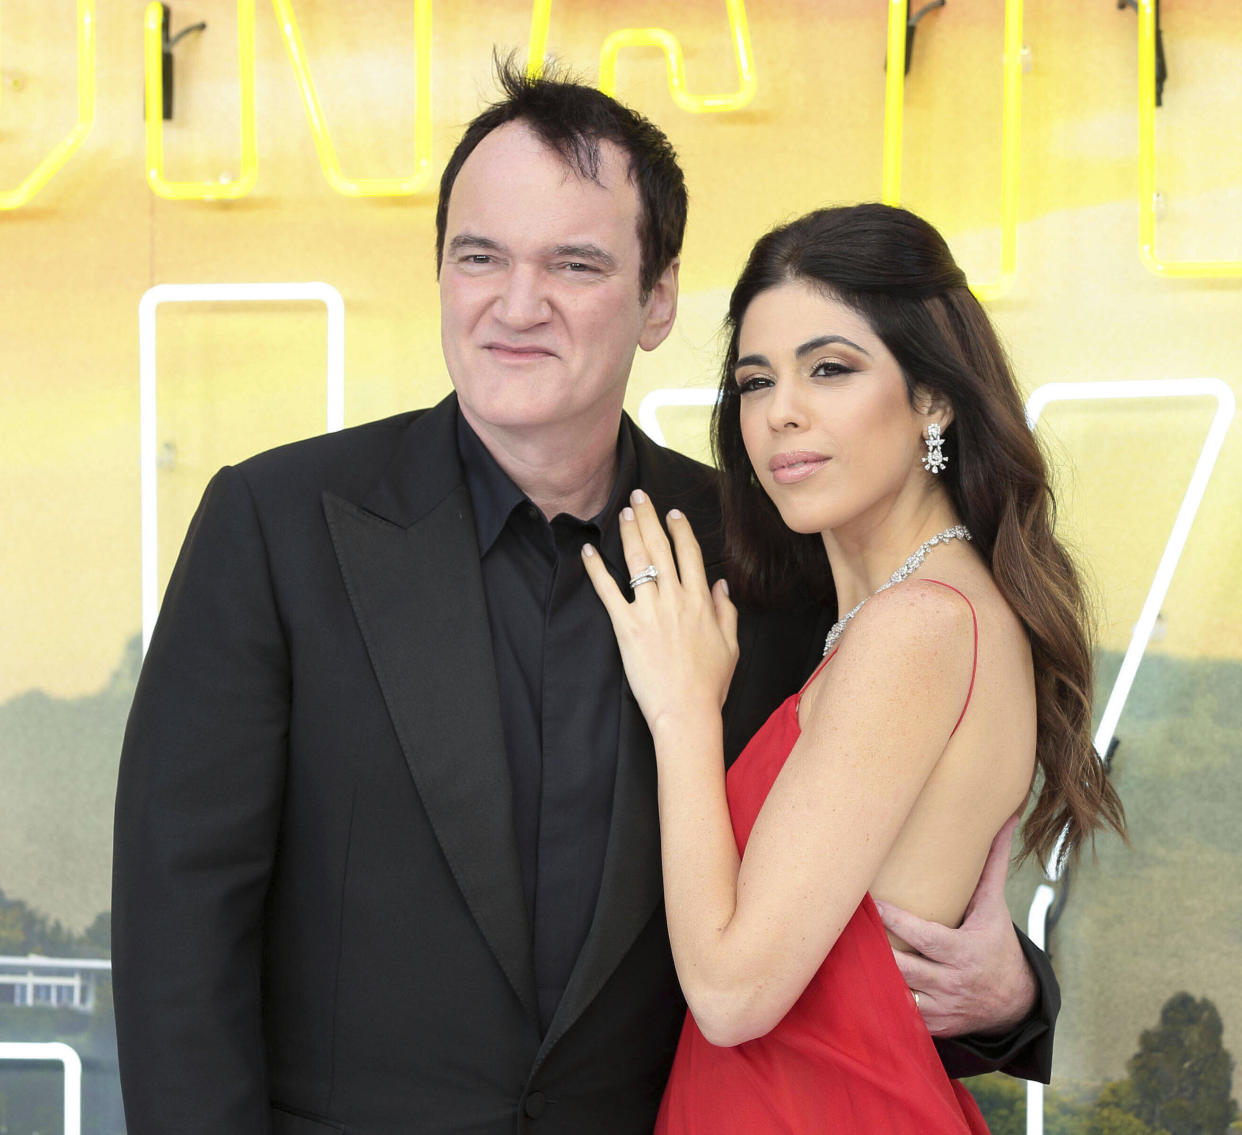 Photo by: ZZ/KGC-211/STAR MAX/IPx 2019 8/21/19 Quentin Tarantino is expecting his first child with wife, Daniella Pick. STAR MAX File Photo: 7/30/19 Quentin Tarantino and Daniella Pick at the premiere of "Once Upon A Time In Hollywood" held at the Odeon Luxe Leicester Square Cinema. (London, England, UK)